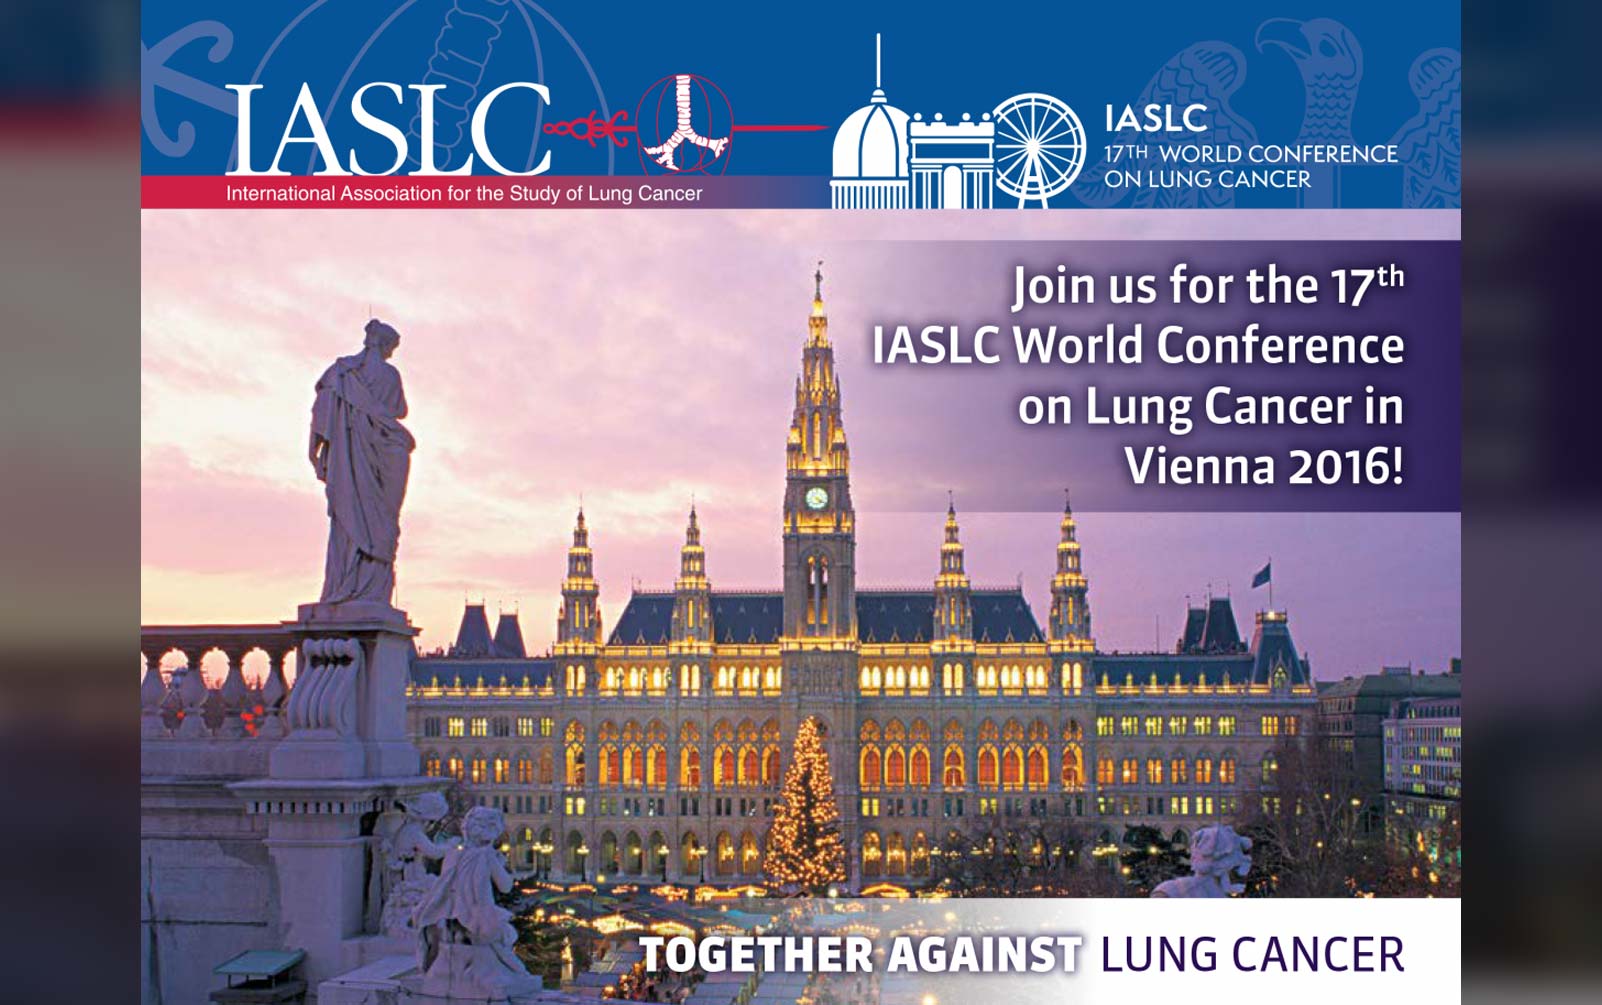 IASLC World Conference on Lung Cancer 2016 Together Against Lung Cancer